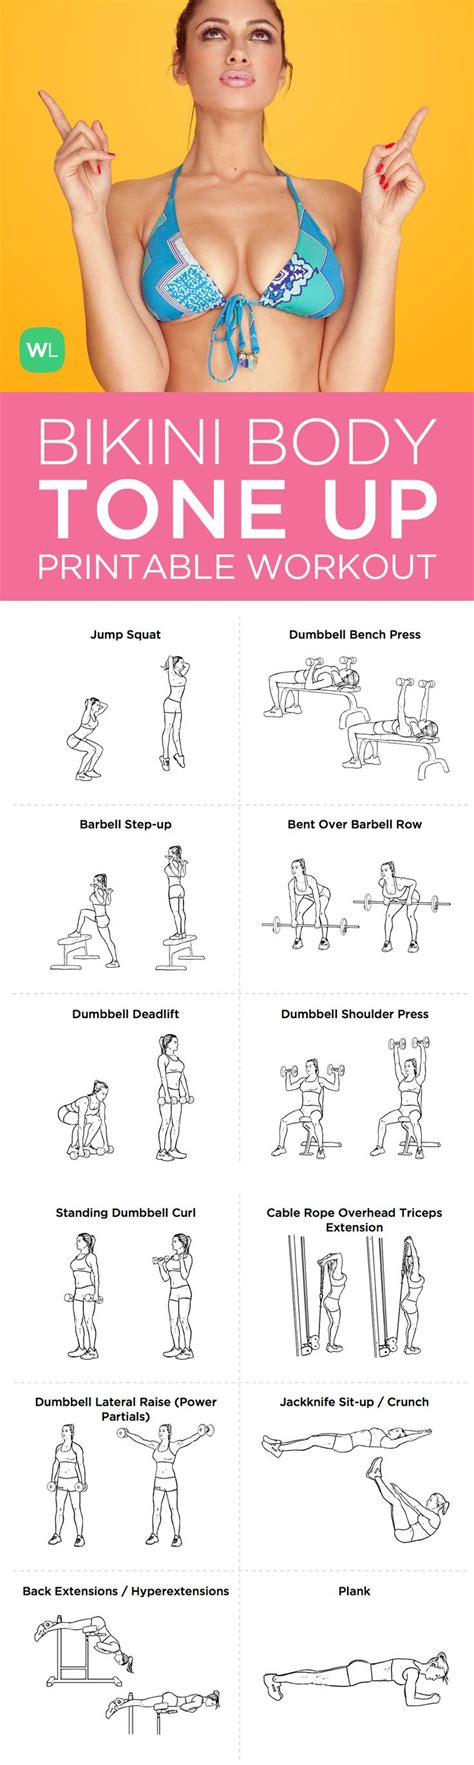 Stay tuned for a new workout plan release in early 2020… do you feel like you could lose a few extra pounds? 9 Best Images of Printable Workout Plans - Printable ...